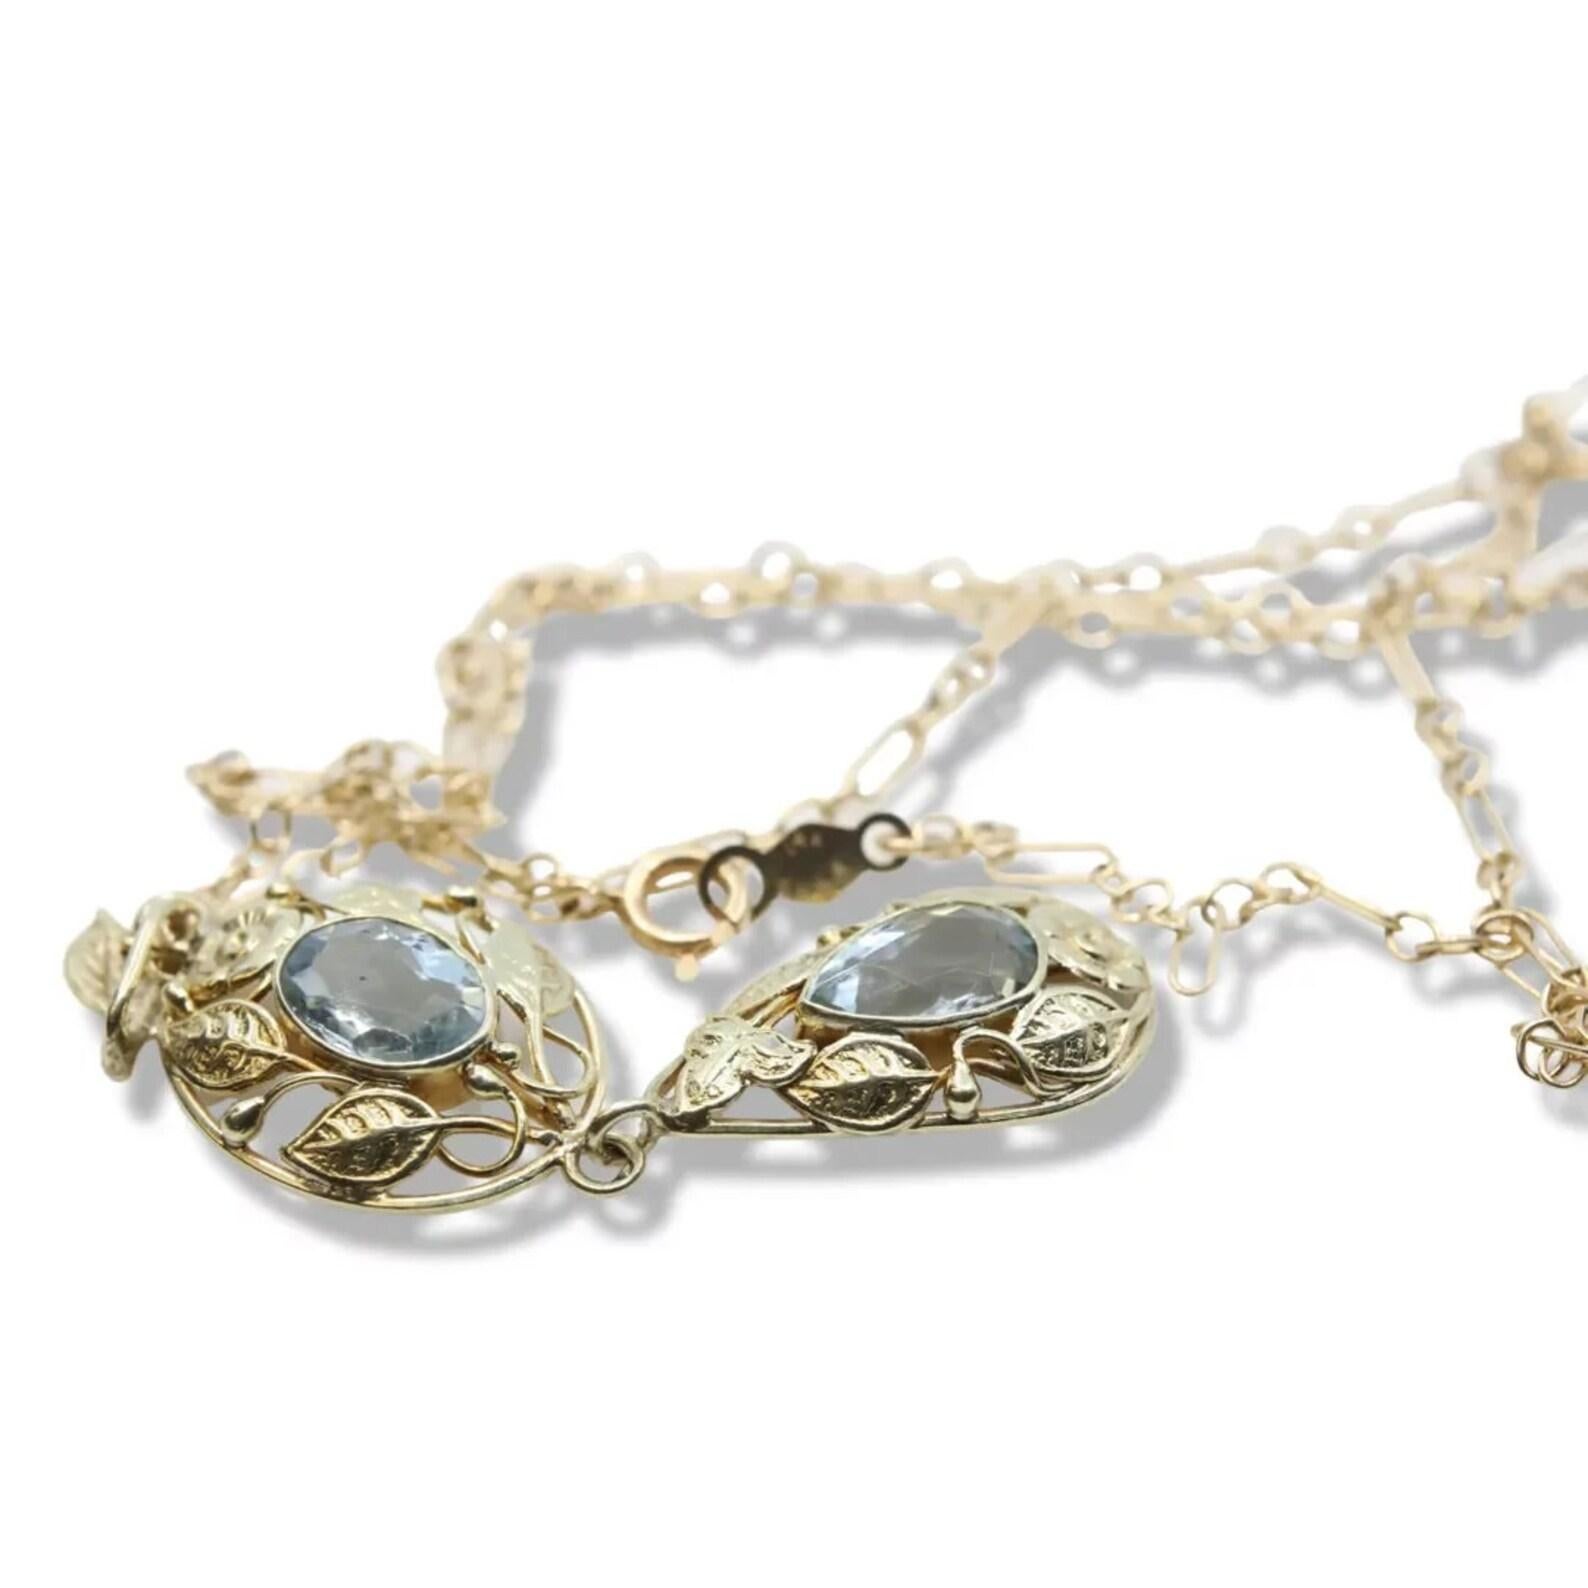 A hand crafted original arts and crafts period aquamarine and foliate decorated necklace in 14 karat yellow gold. Featuring a pear shaped and an oval rose cut aquamarine this necklace is set with 2.50 carats of aquamarine. Surrounding the aquamarine